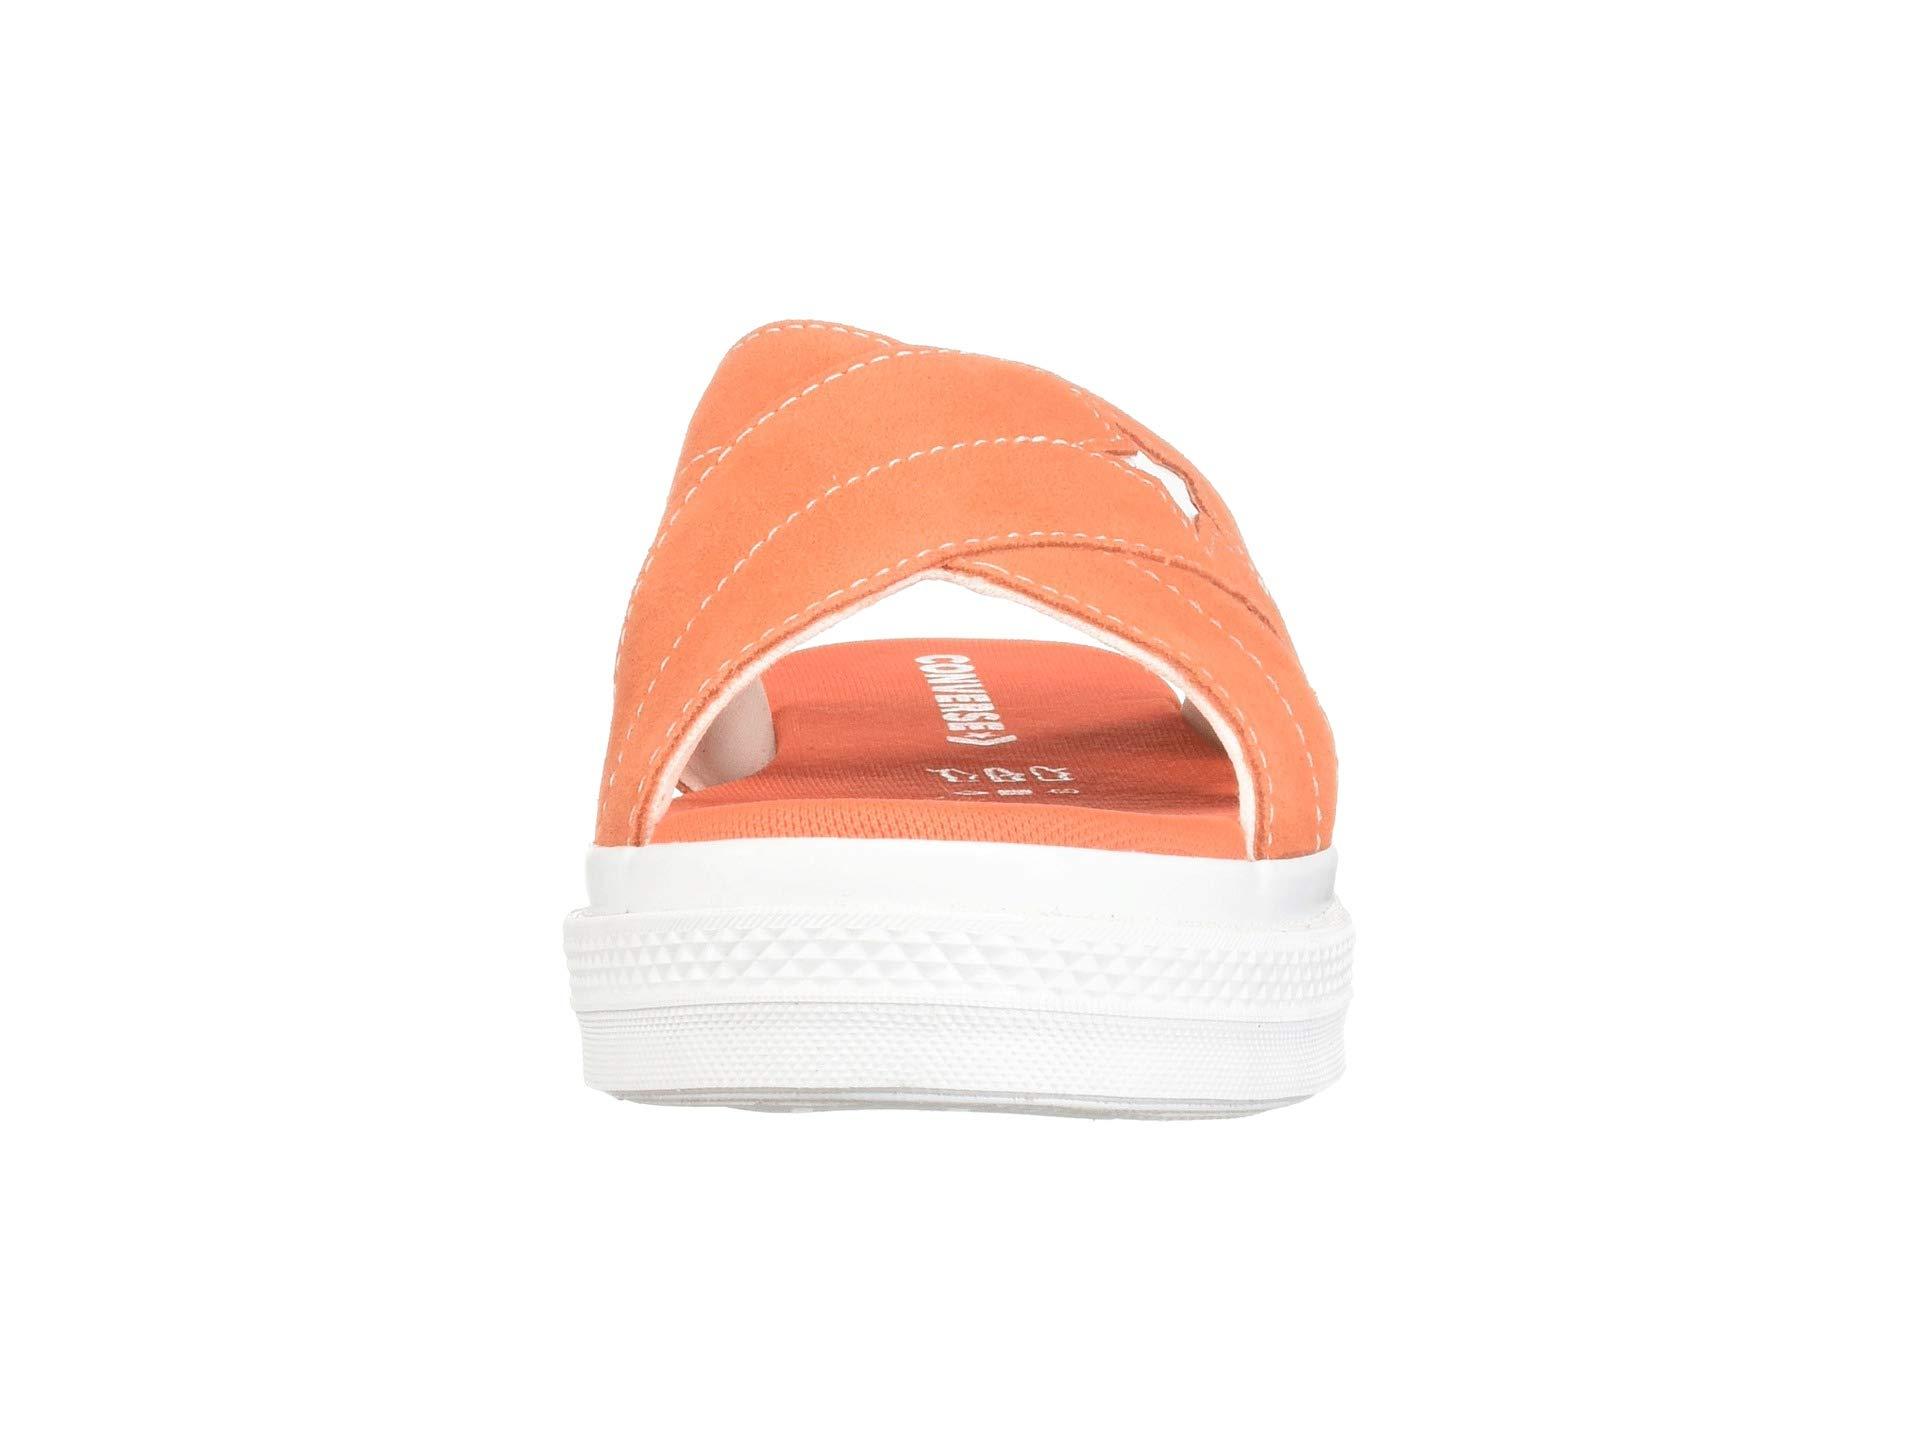 Converse One Star Suede Sandal Slip in White - Lyst